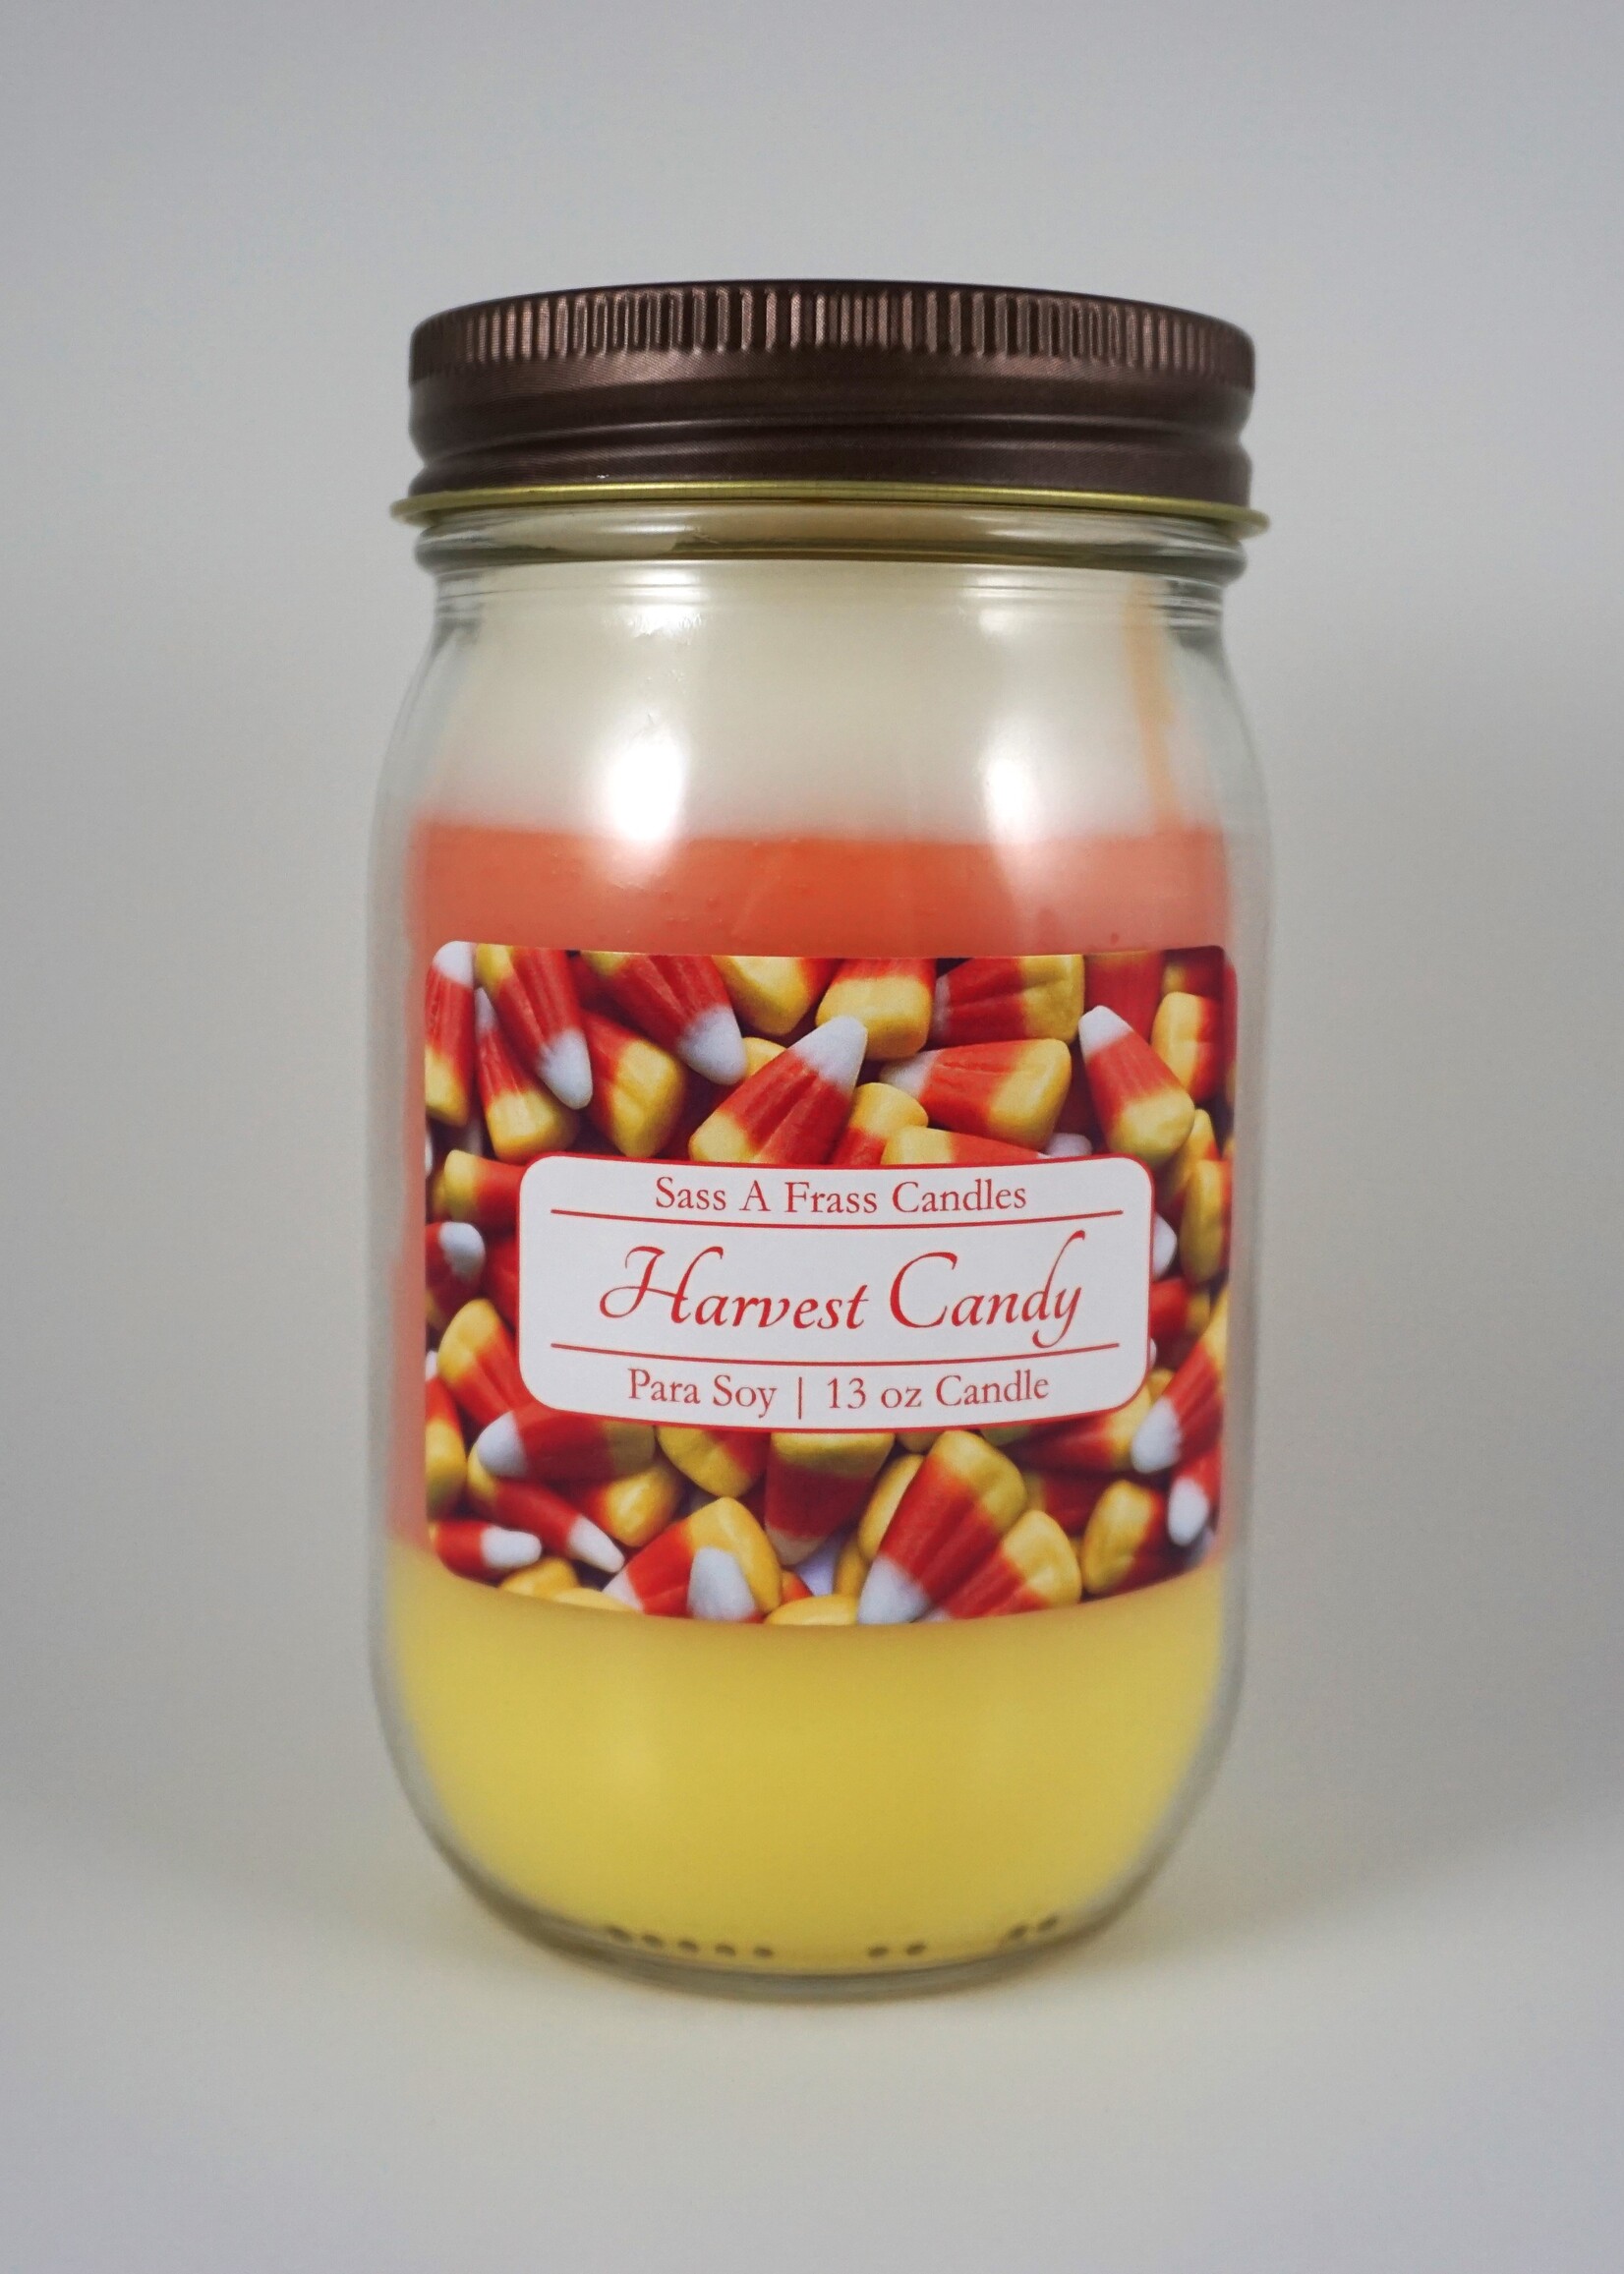 Harvest Candy 13 oz Candle